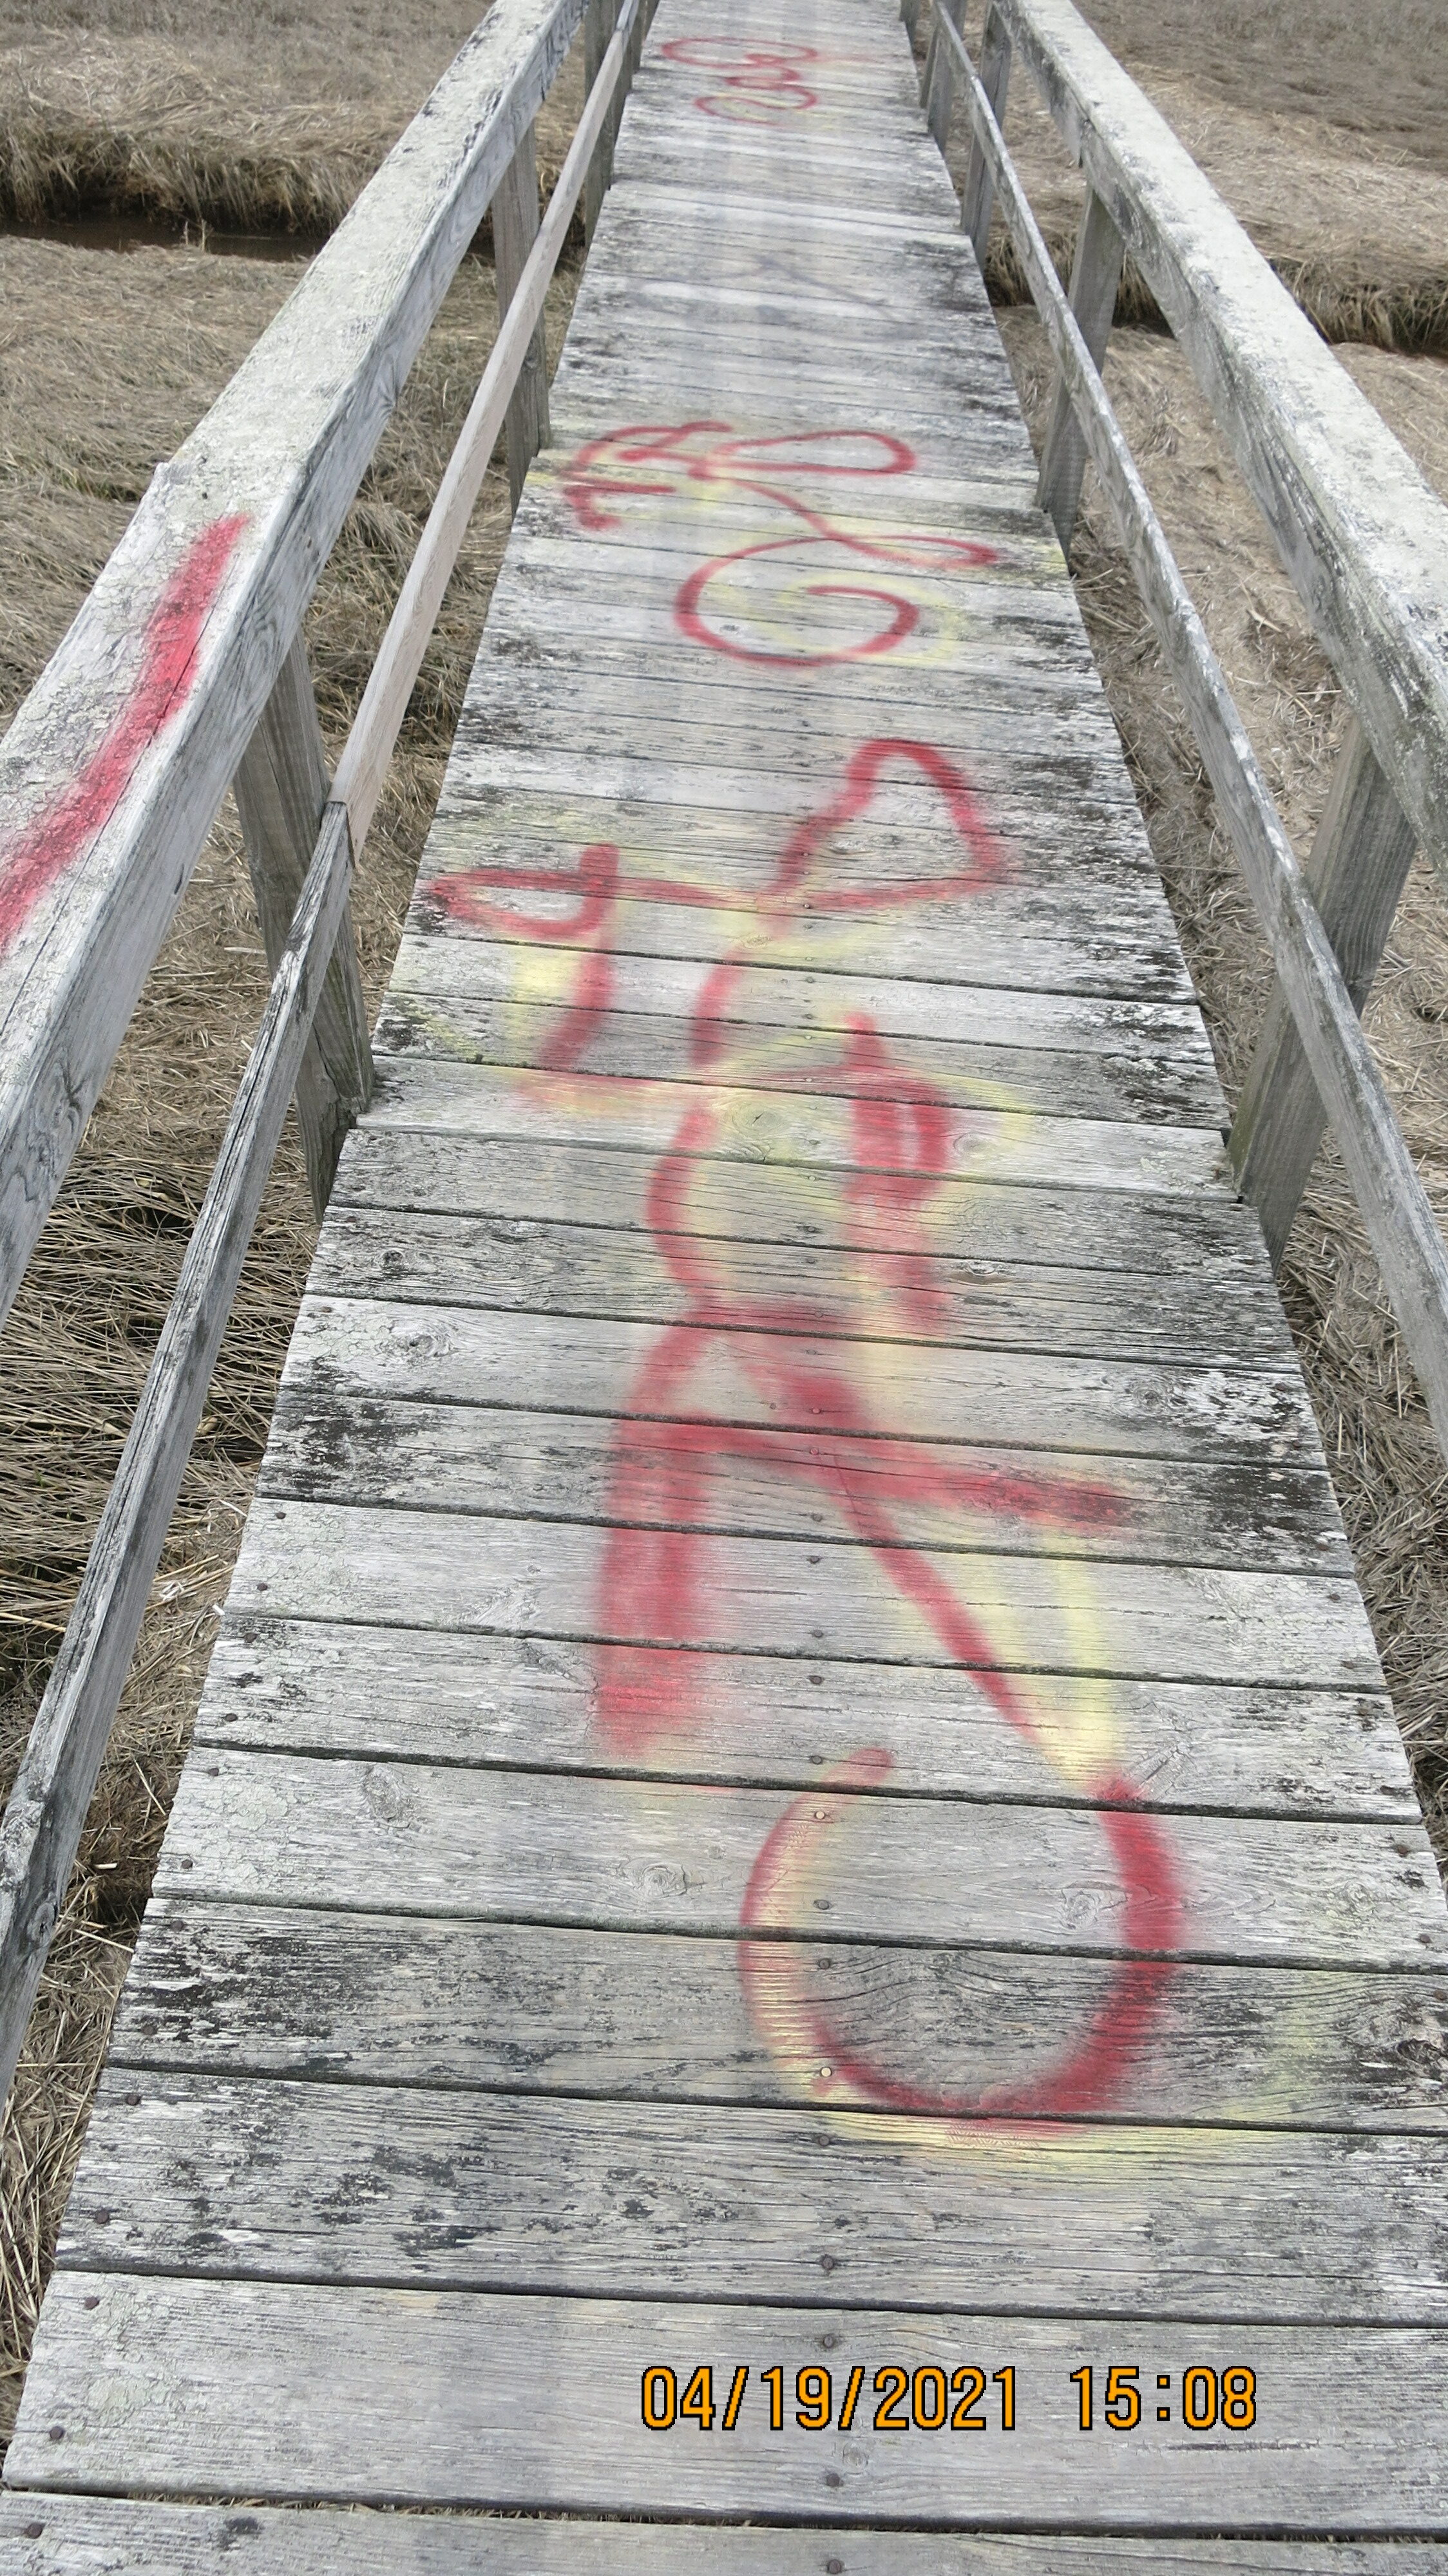 Some of the graffiti from the case.